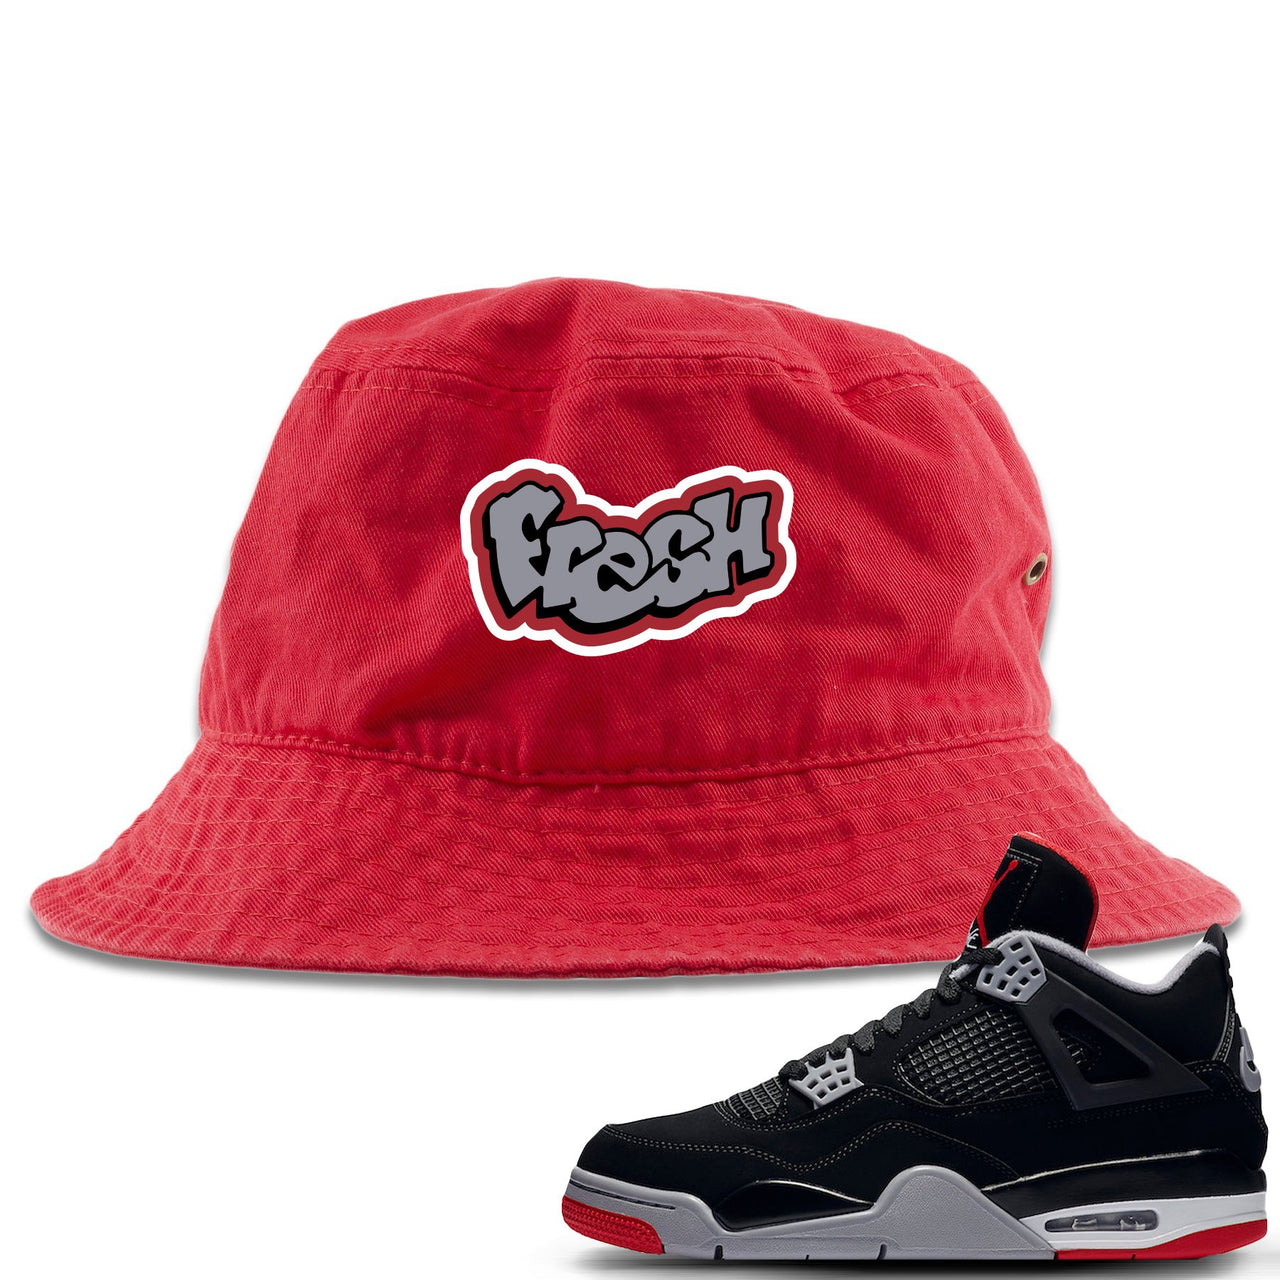 This red and grey bucket hat will match great with your Air Jordan 4 Bred shoes